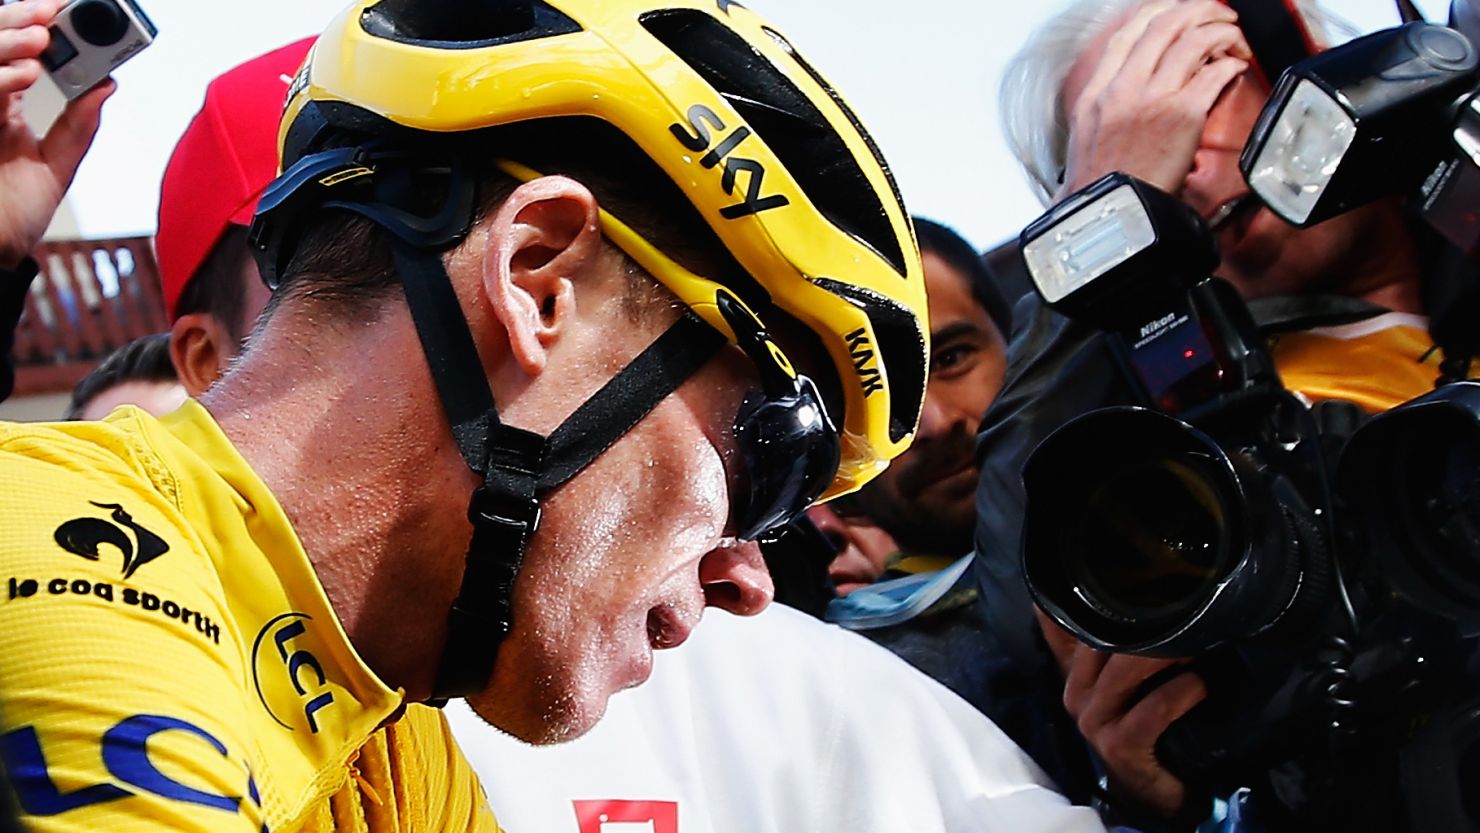 Chris Froome is surrounded by the media after keeping the yellow jersey ahead of the final stage of the Tour de France.